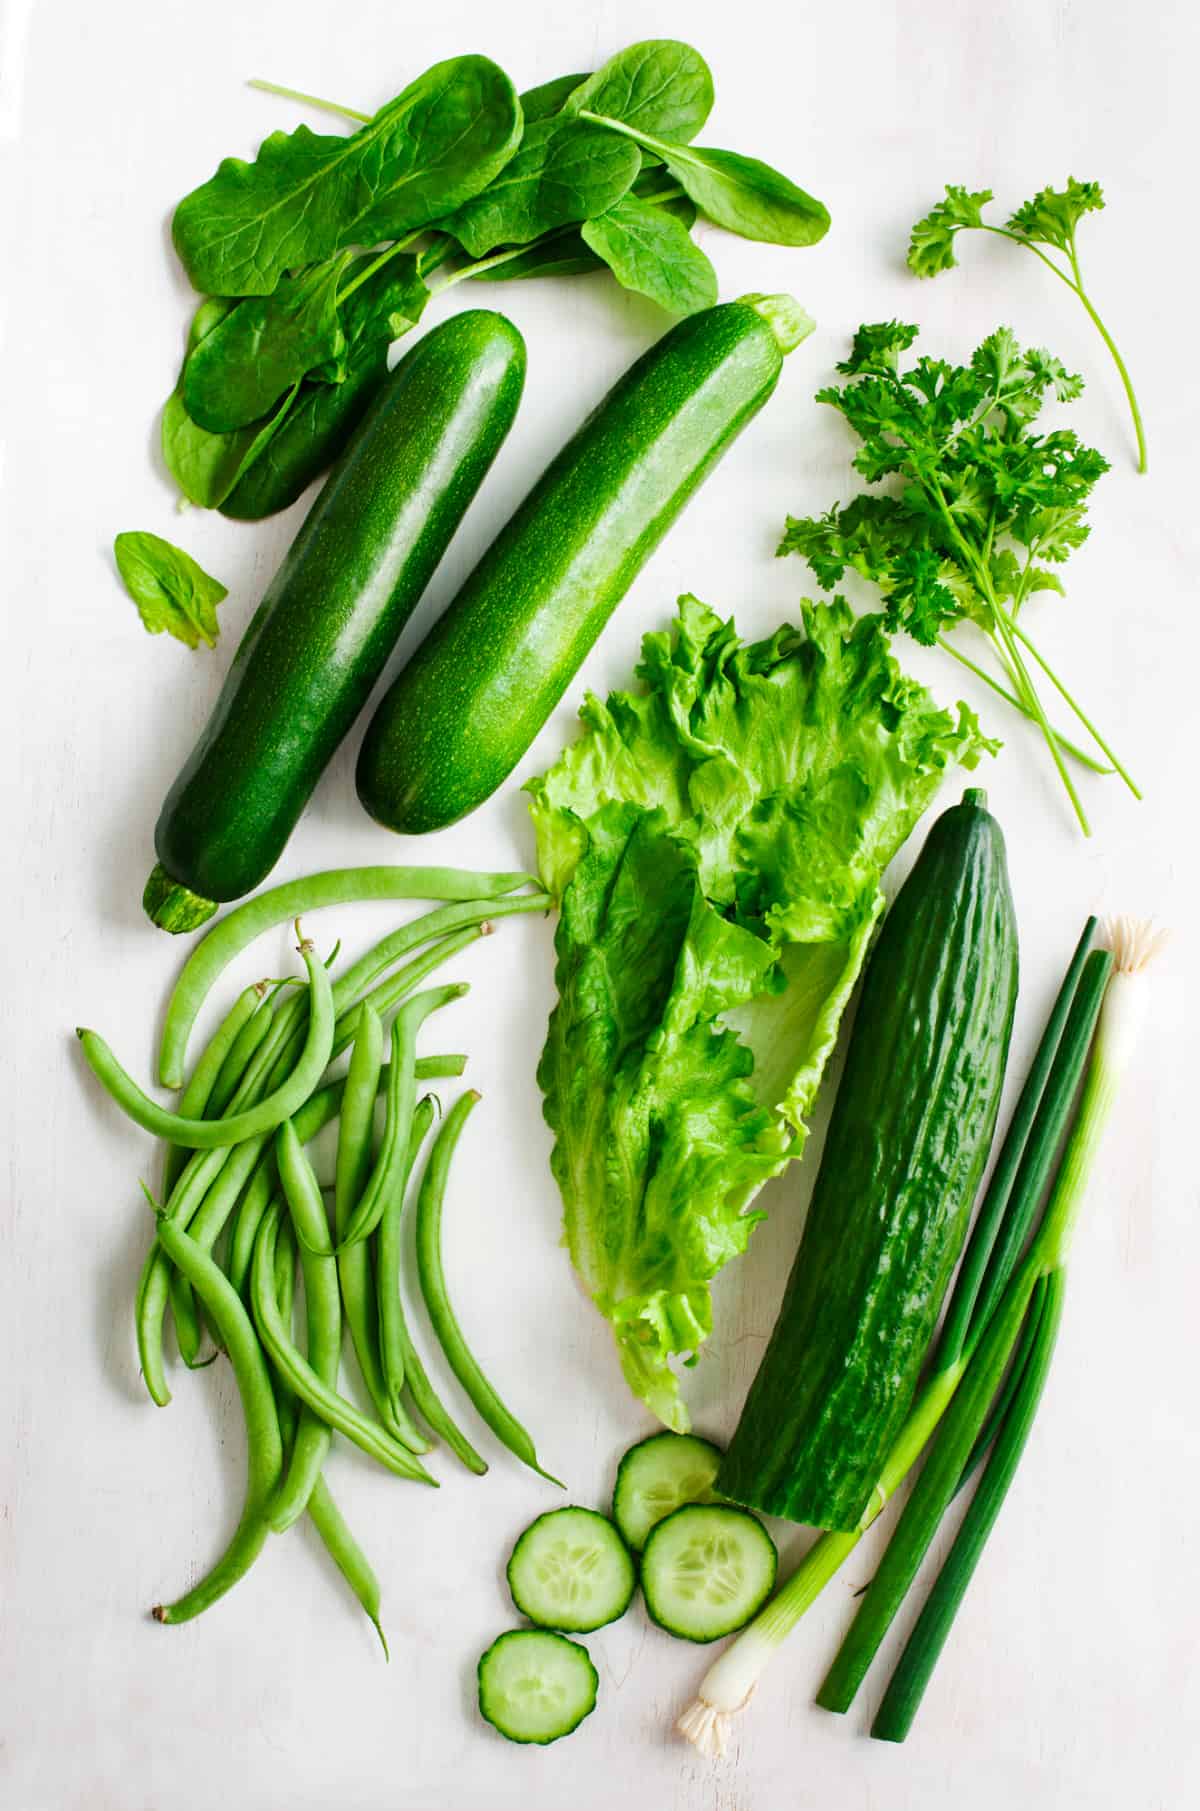 Various green vegetables on a table.